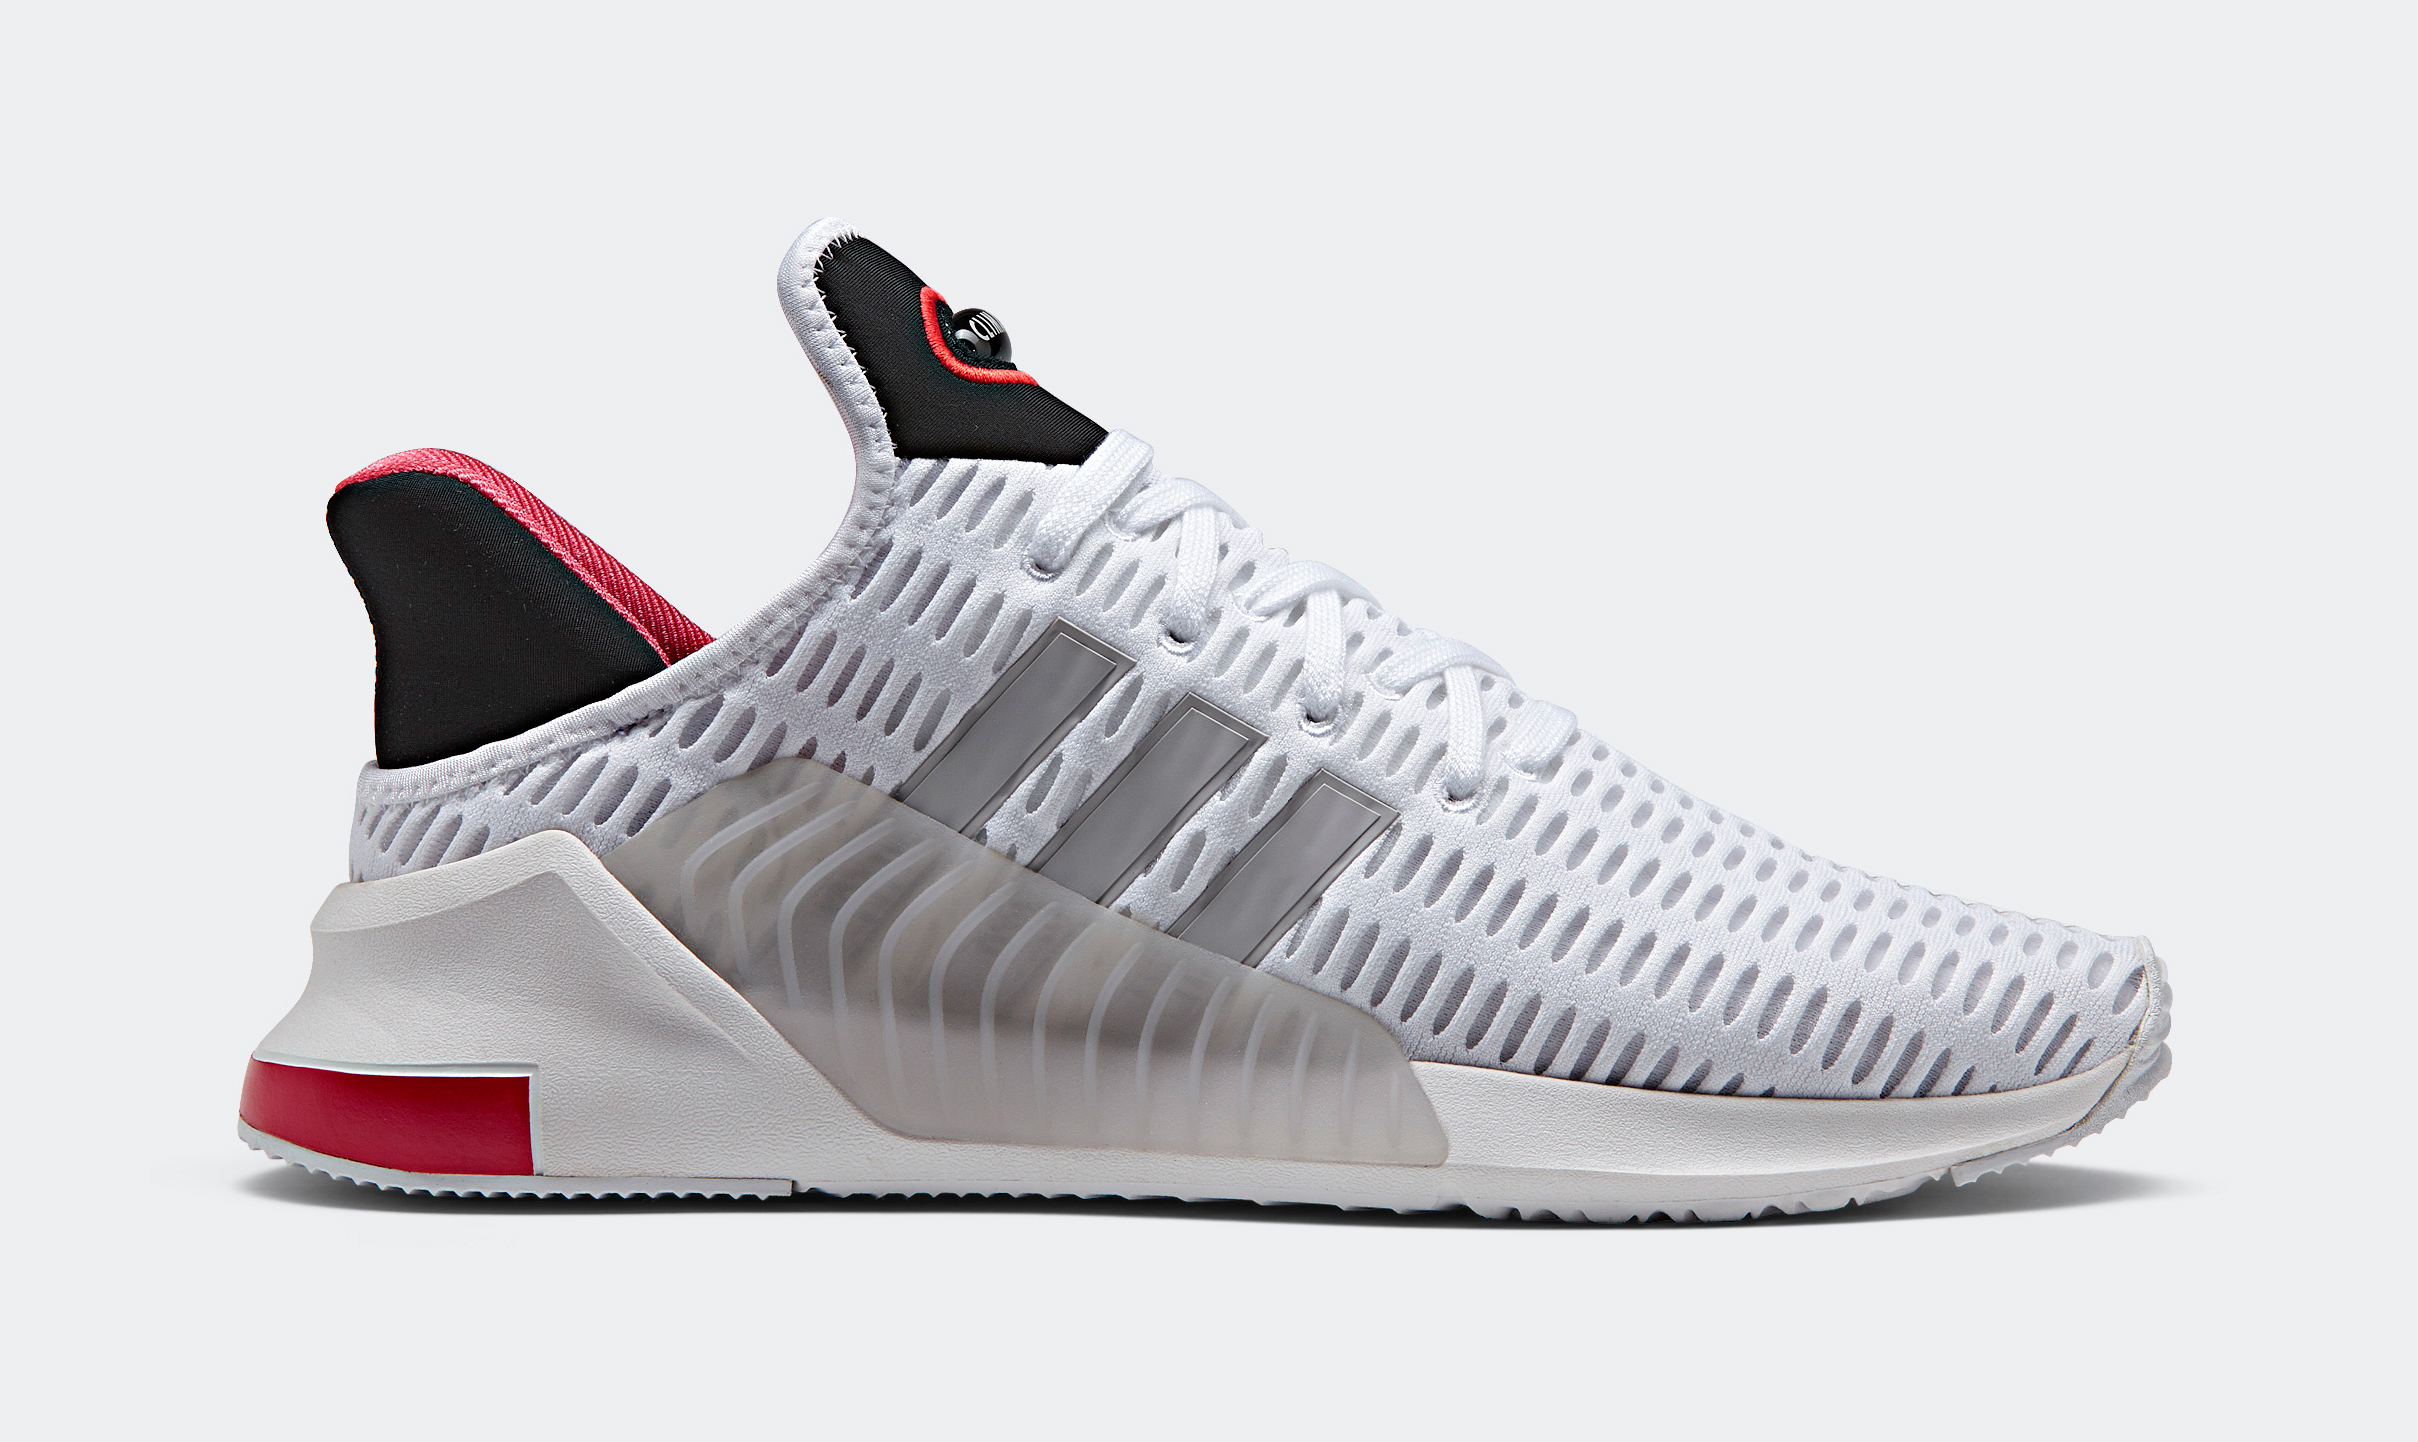 First Look at adidas' New Climacool Sneaker